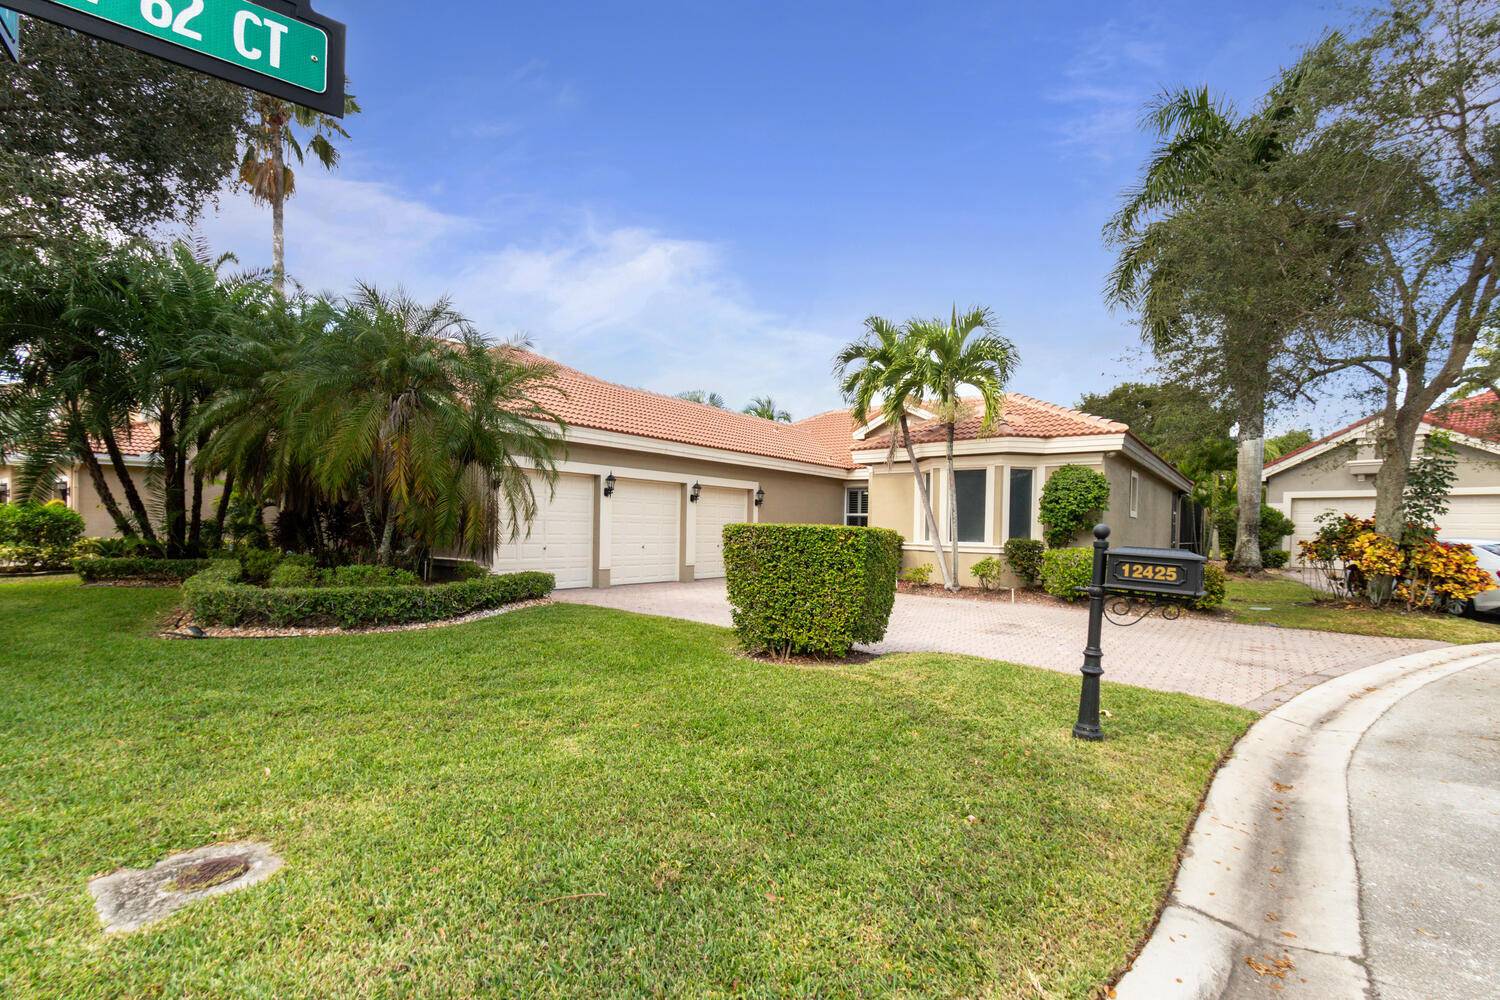 A MUST SEE ! This home of over 2700sf has been completely remodeled in the last year.